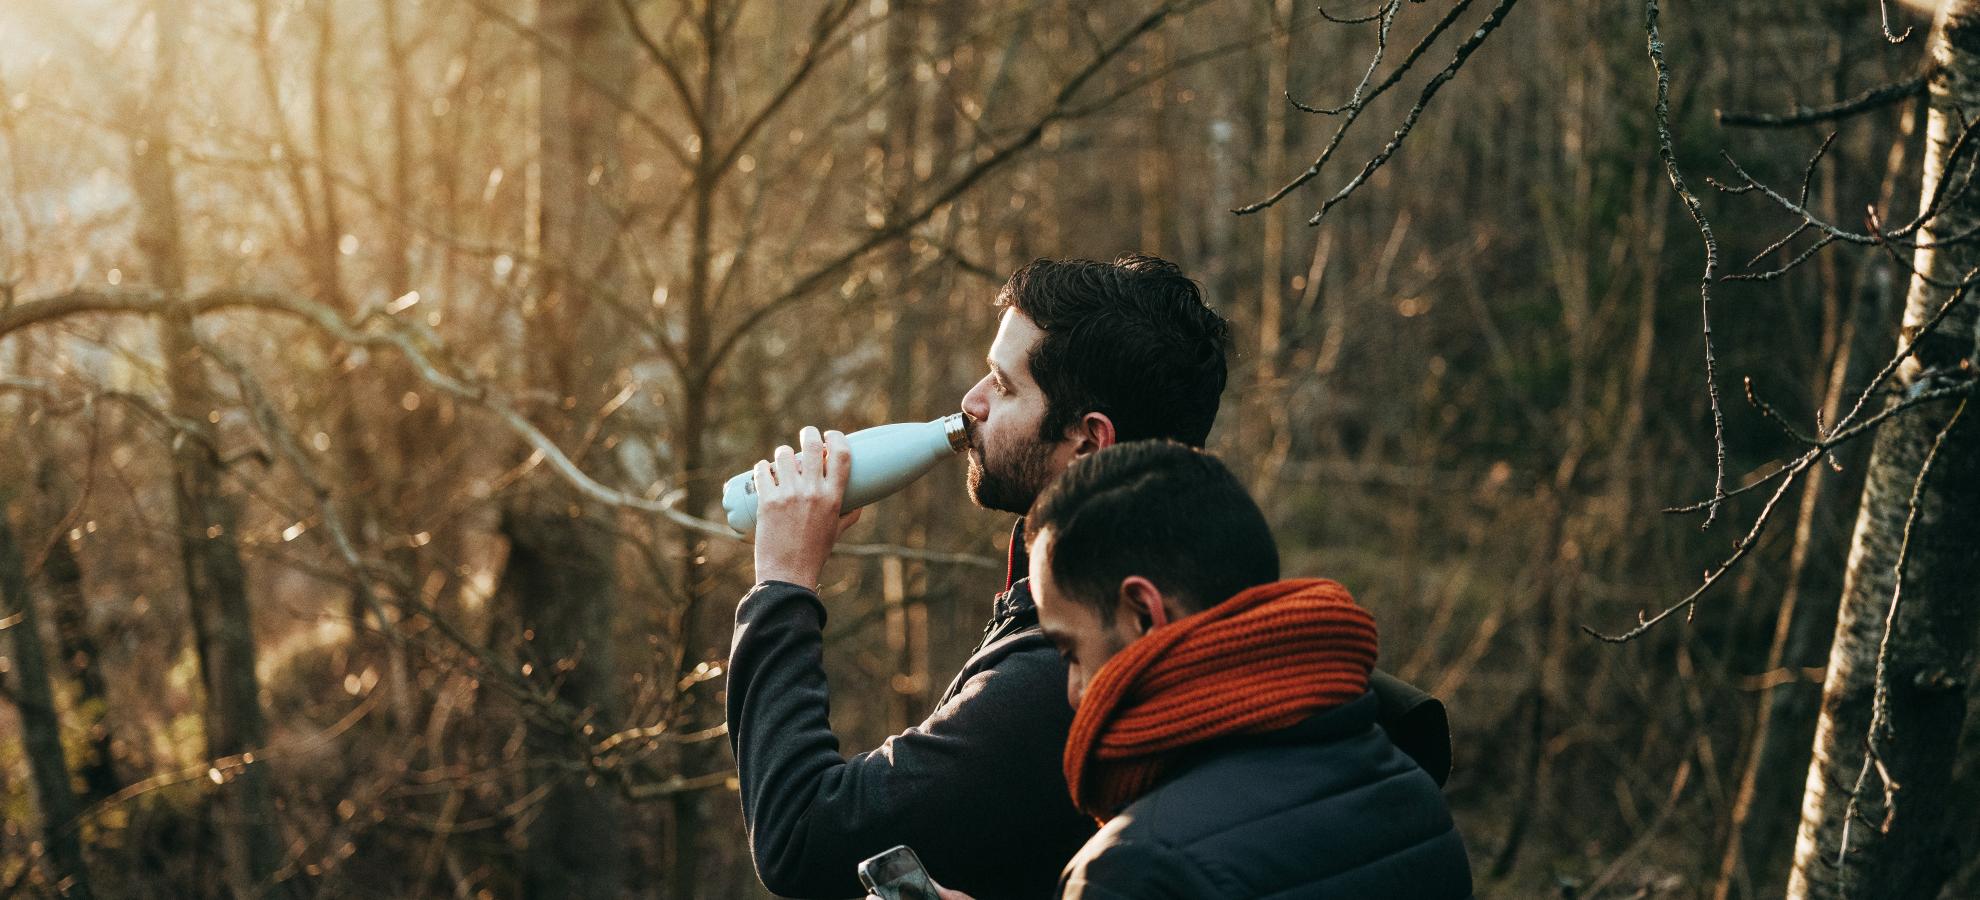 Two gentlemen, one drinking from a water bottle and the other checking their phone ,are standing in the woods with soft, golden sunlight shining through the trees towards them.